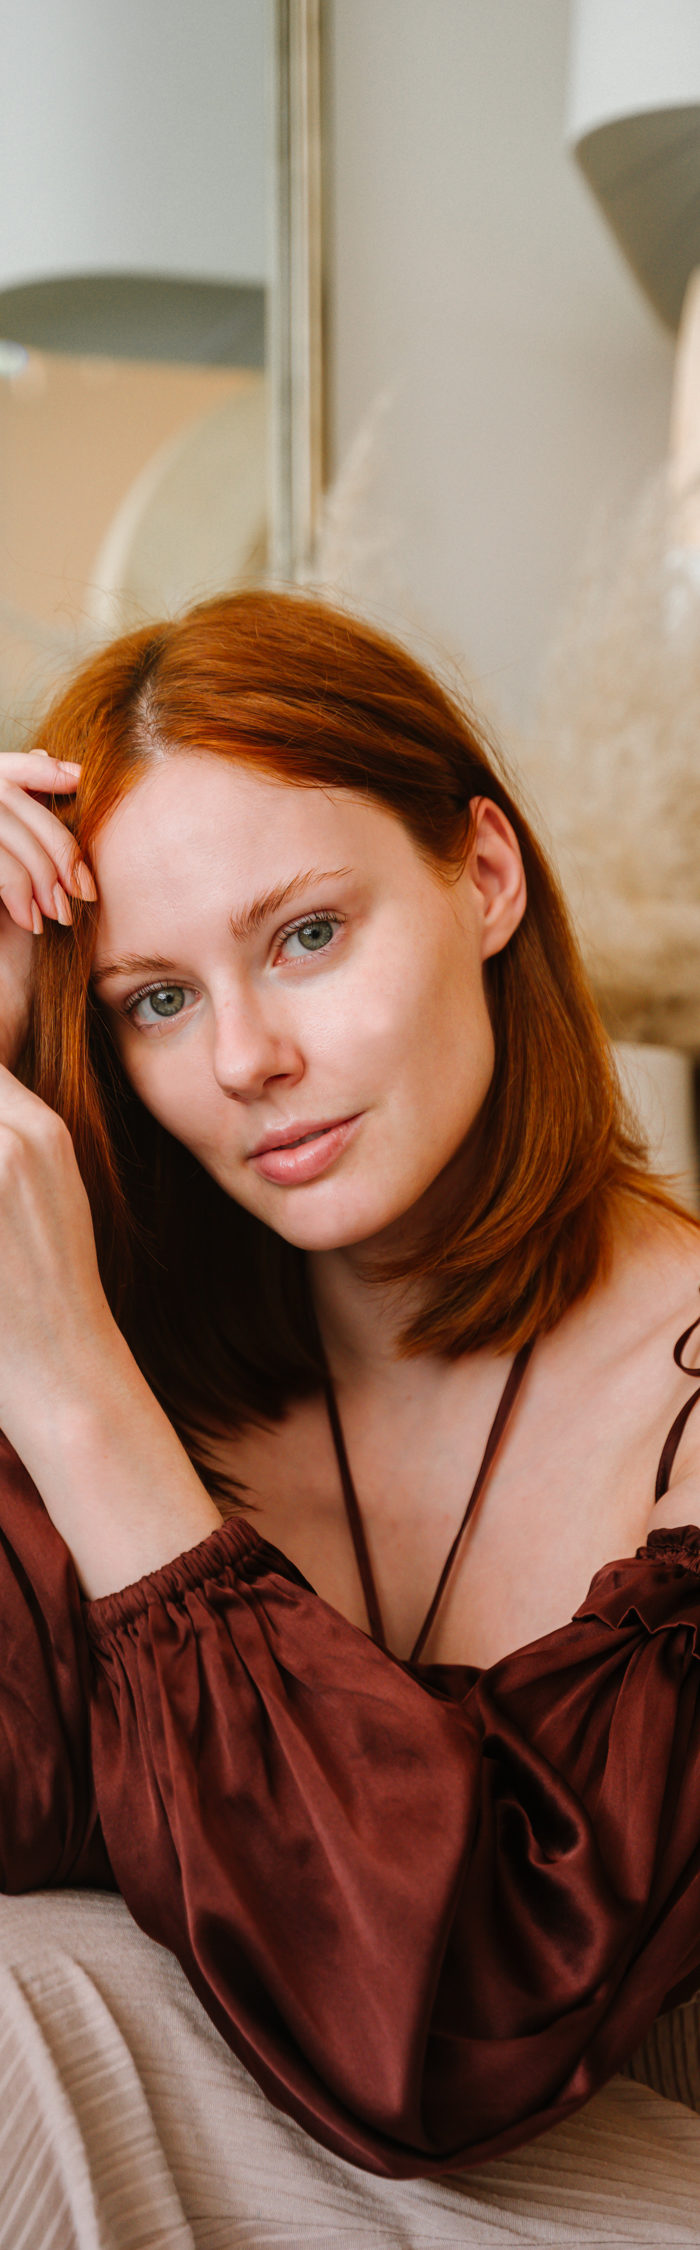 Miss USA 2011 Alyssa Campanella of The A list blog shares her winter skin care routine